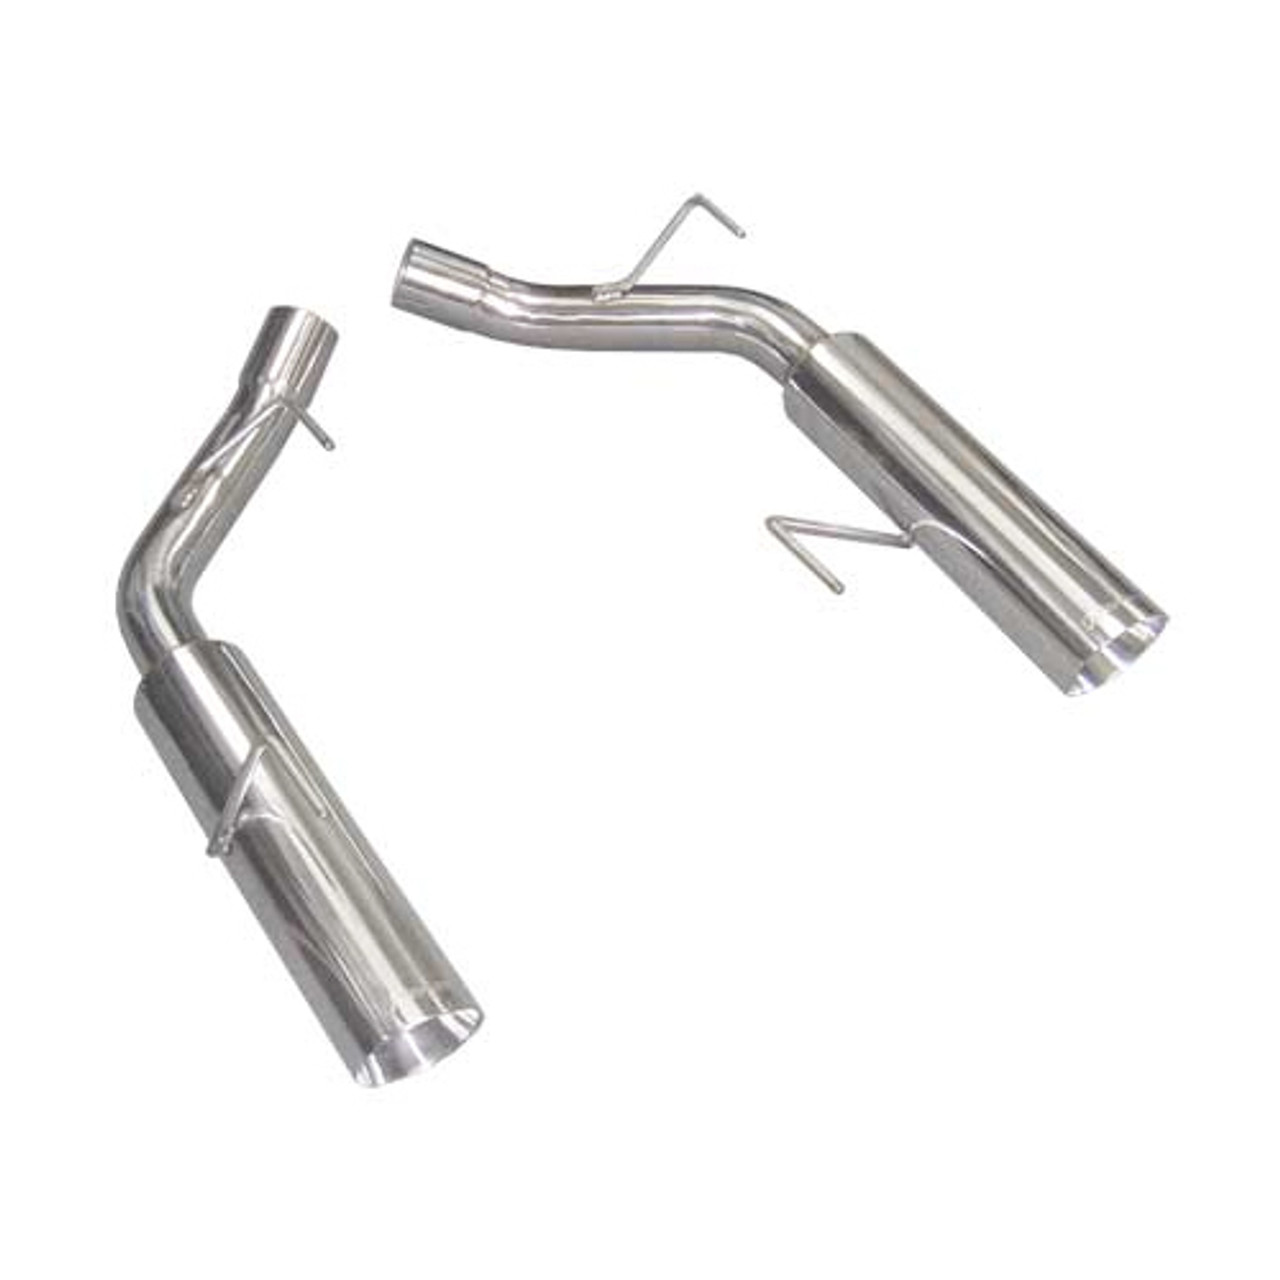 Pypes 05-10 Mustang 4.6L 2.5in Axle Back Exhaust System - PYPSFM60MS